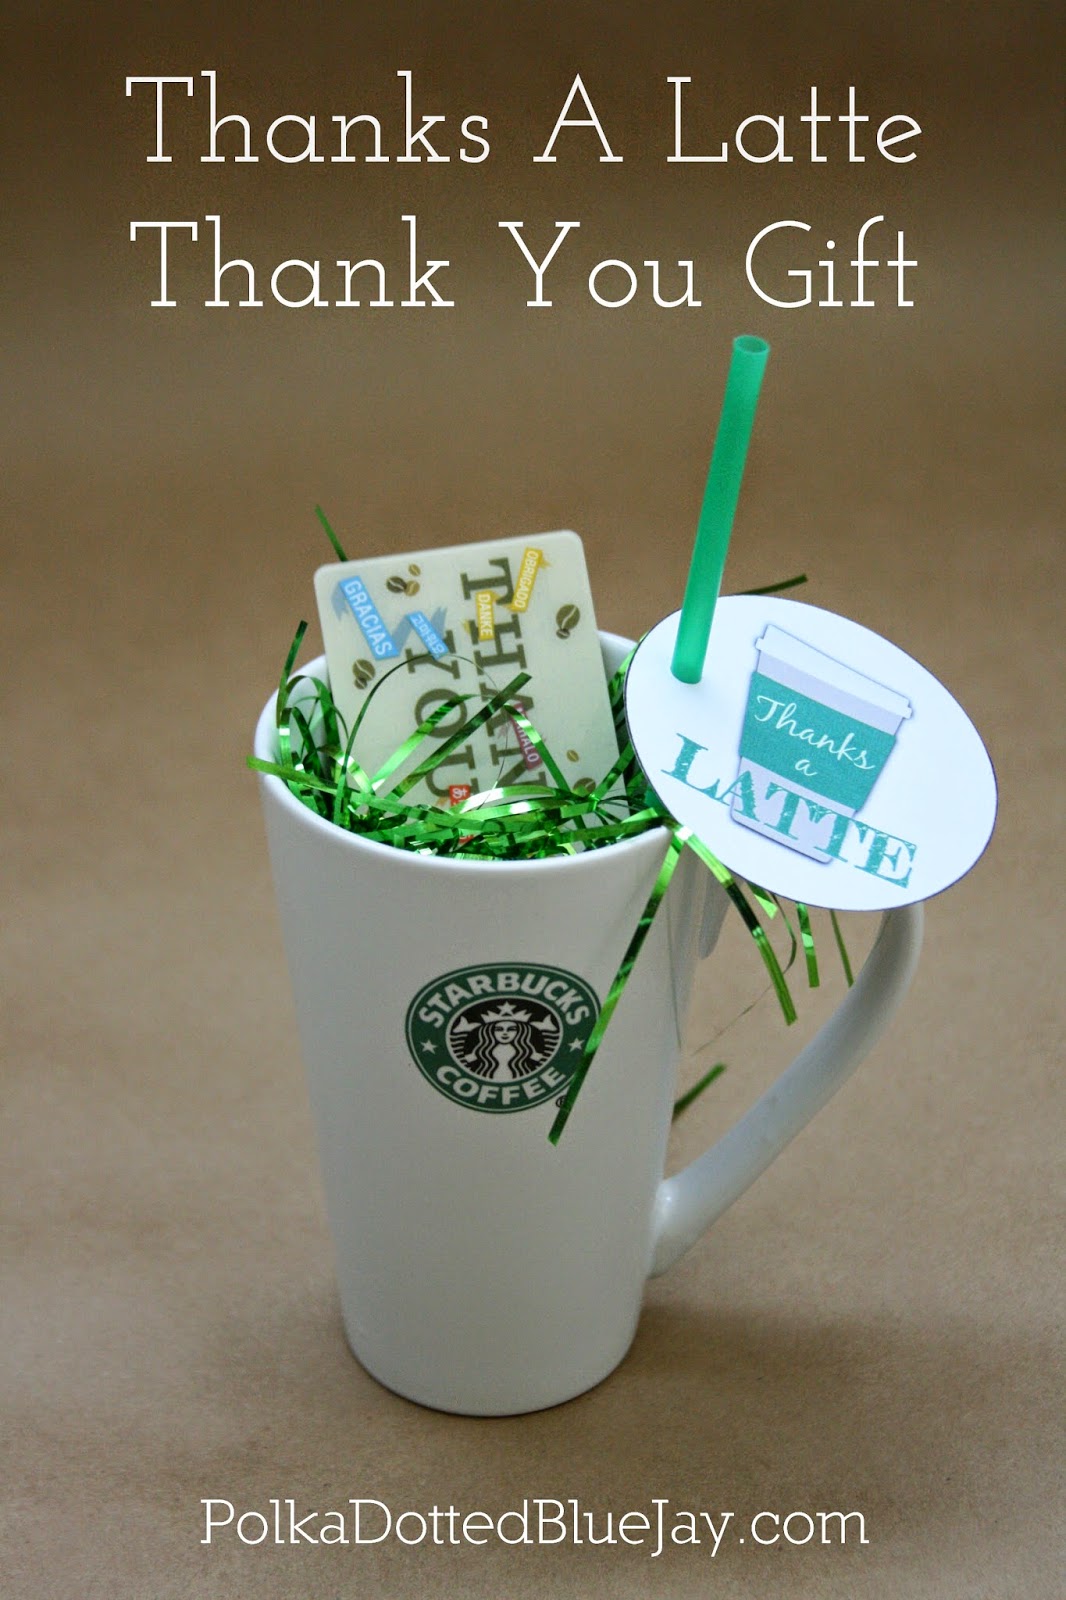 Thanks A Latte -Thank You Gift Update - Polka Dotted Blue Jay